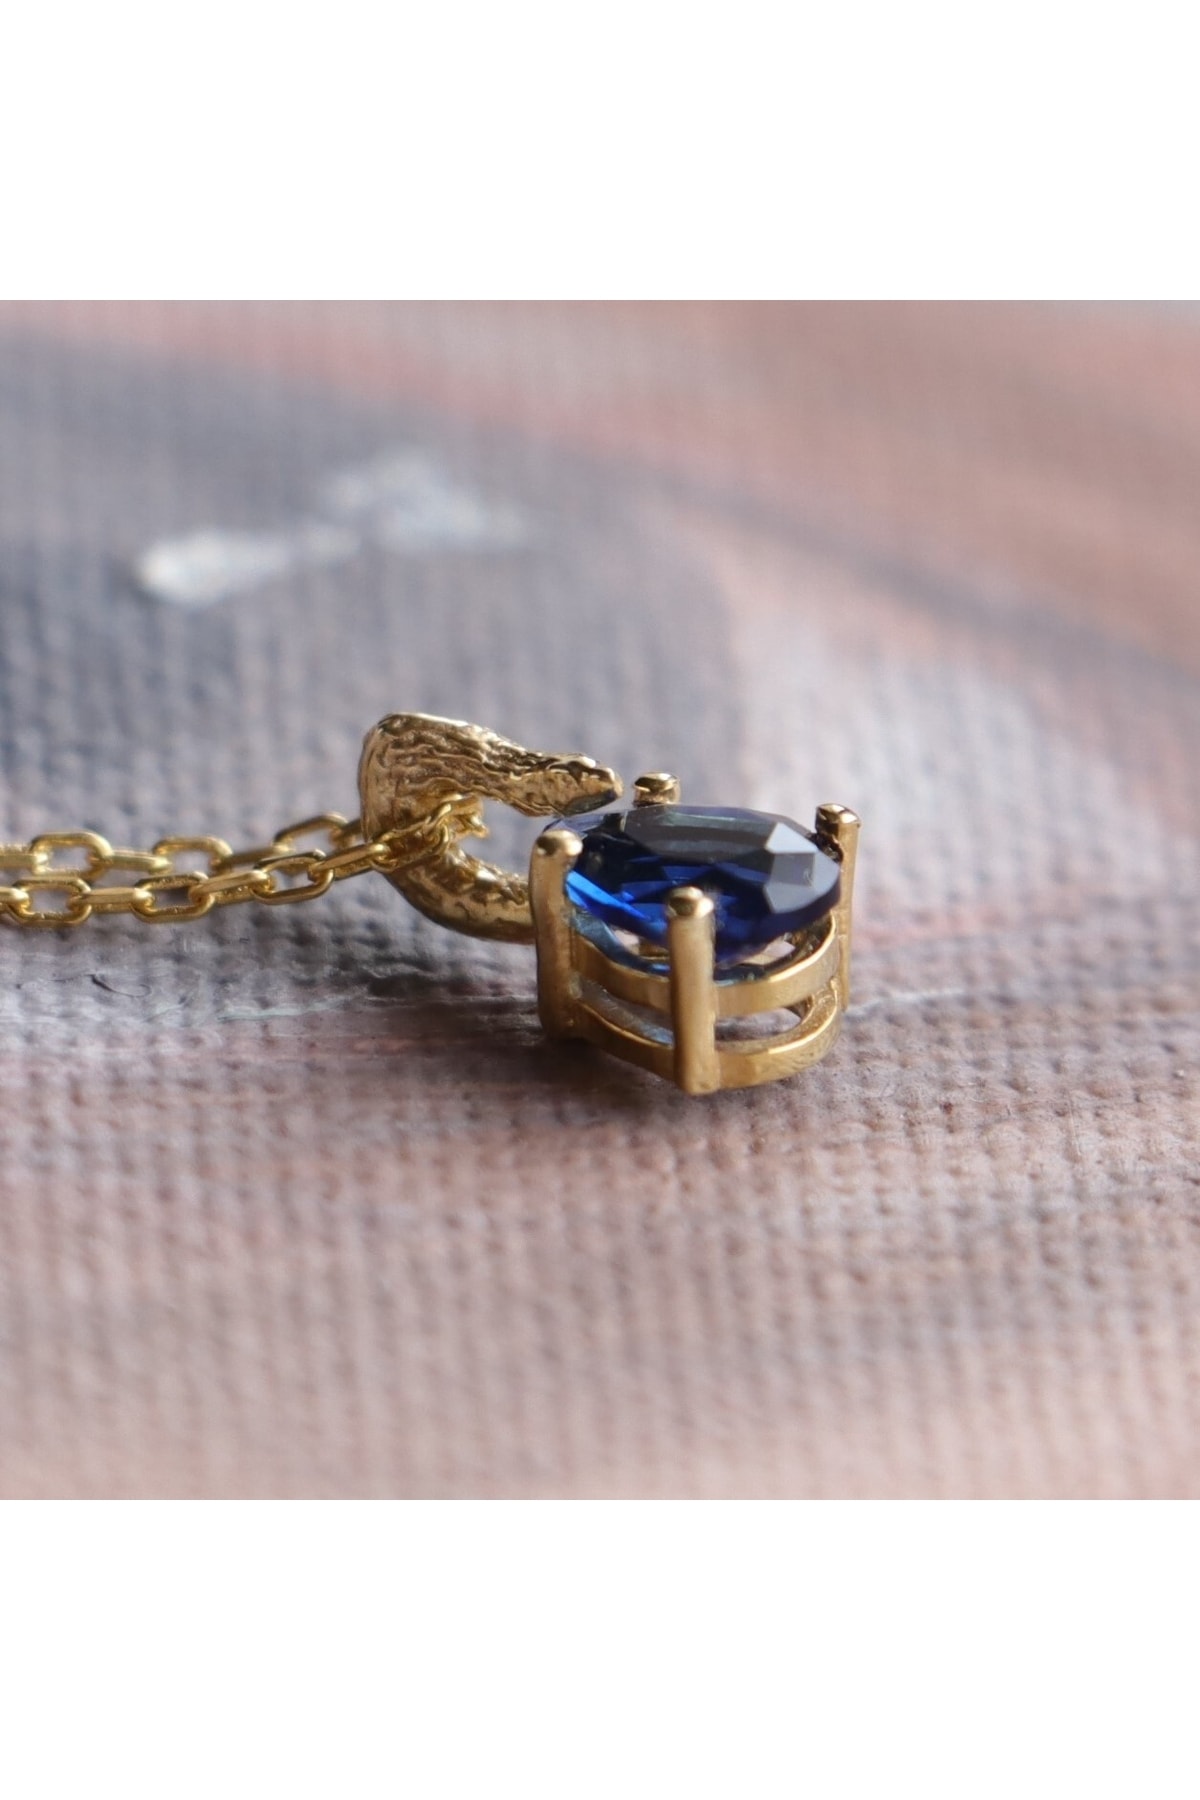 Drop Sapphire Necklace (925-gold Plated)